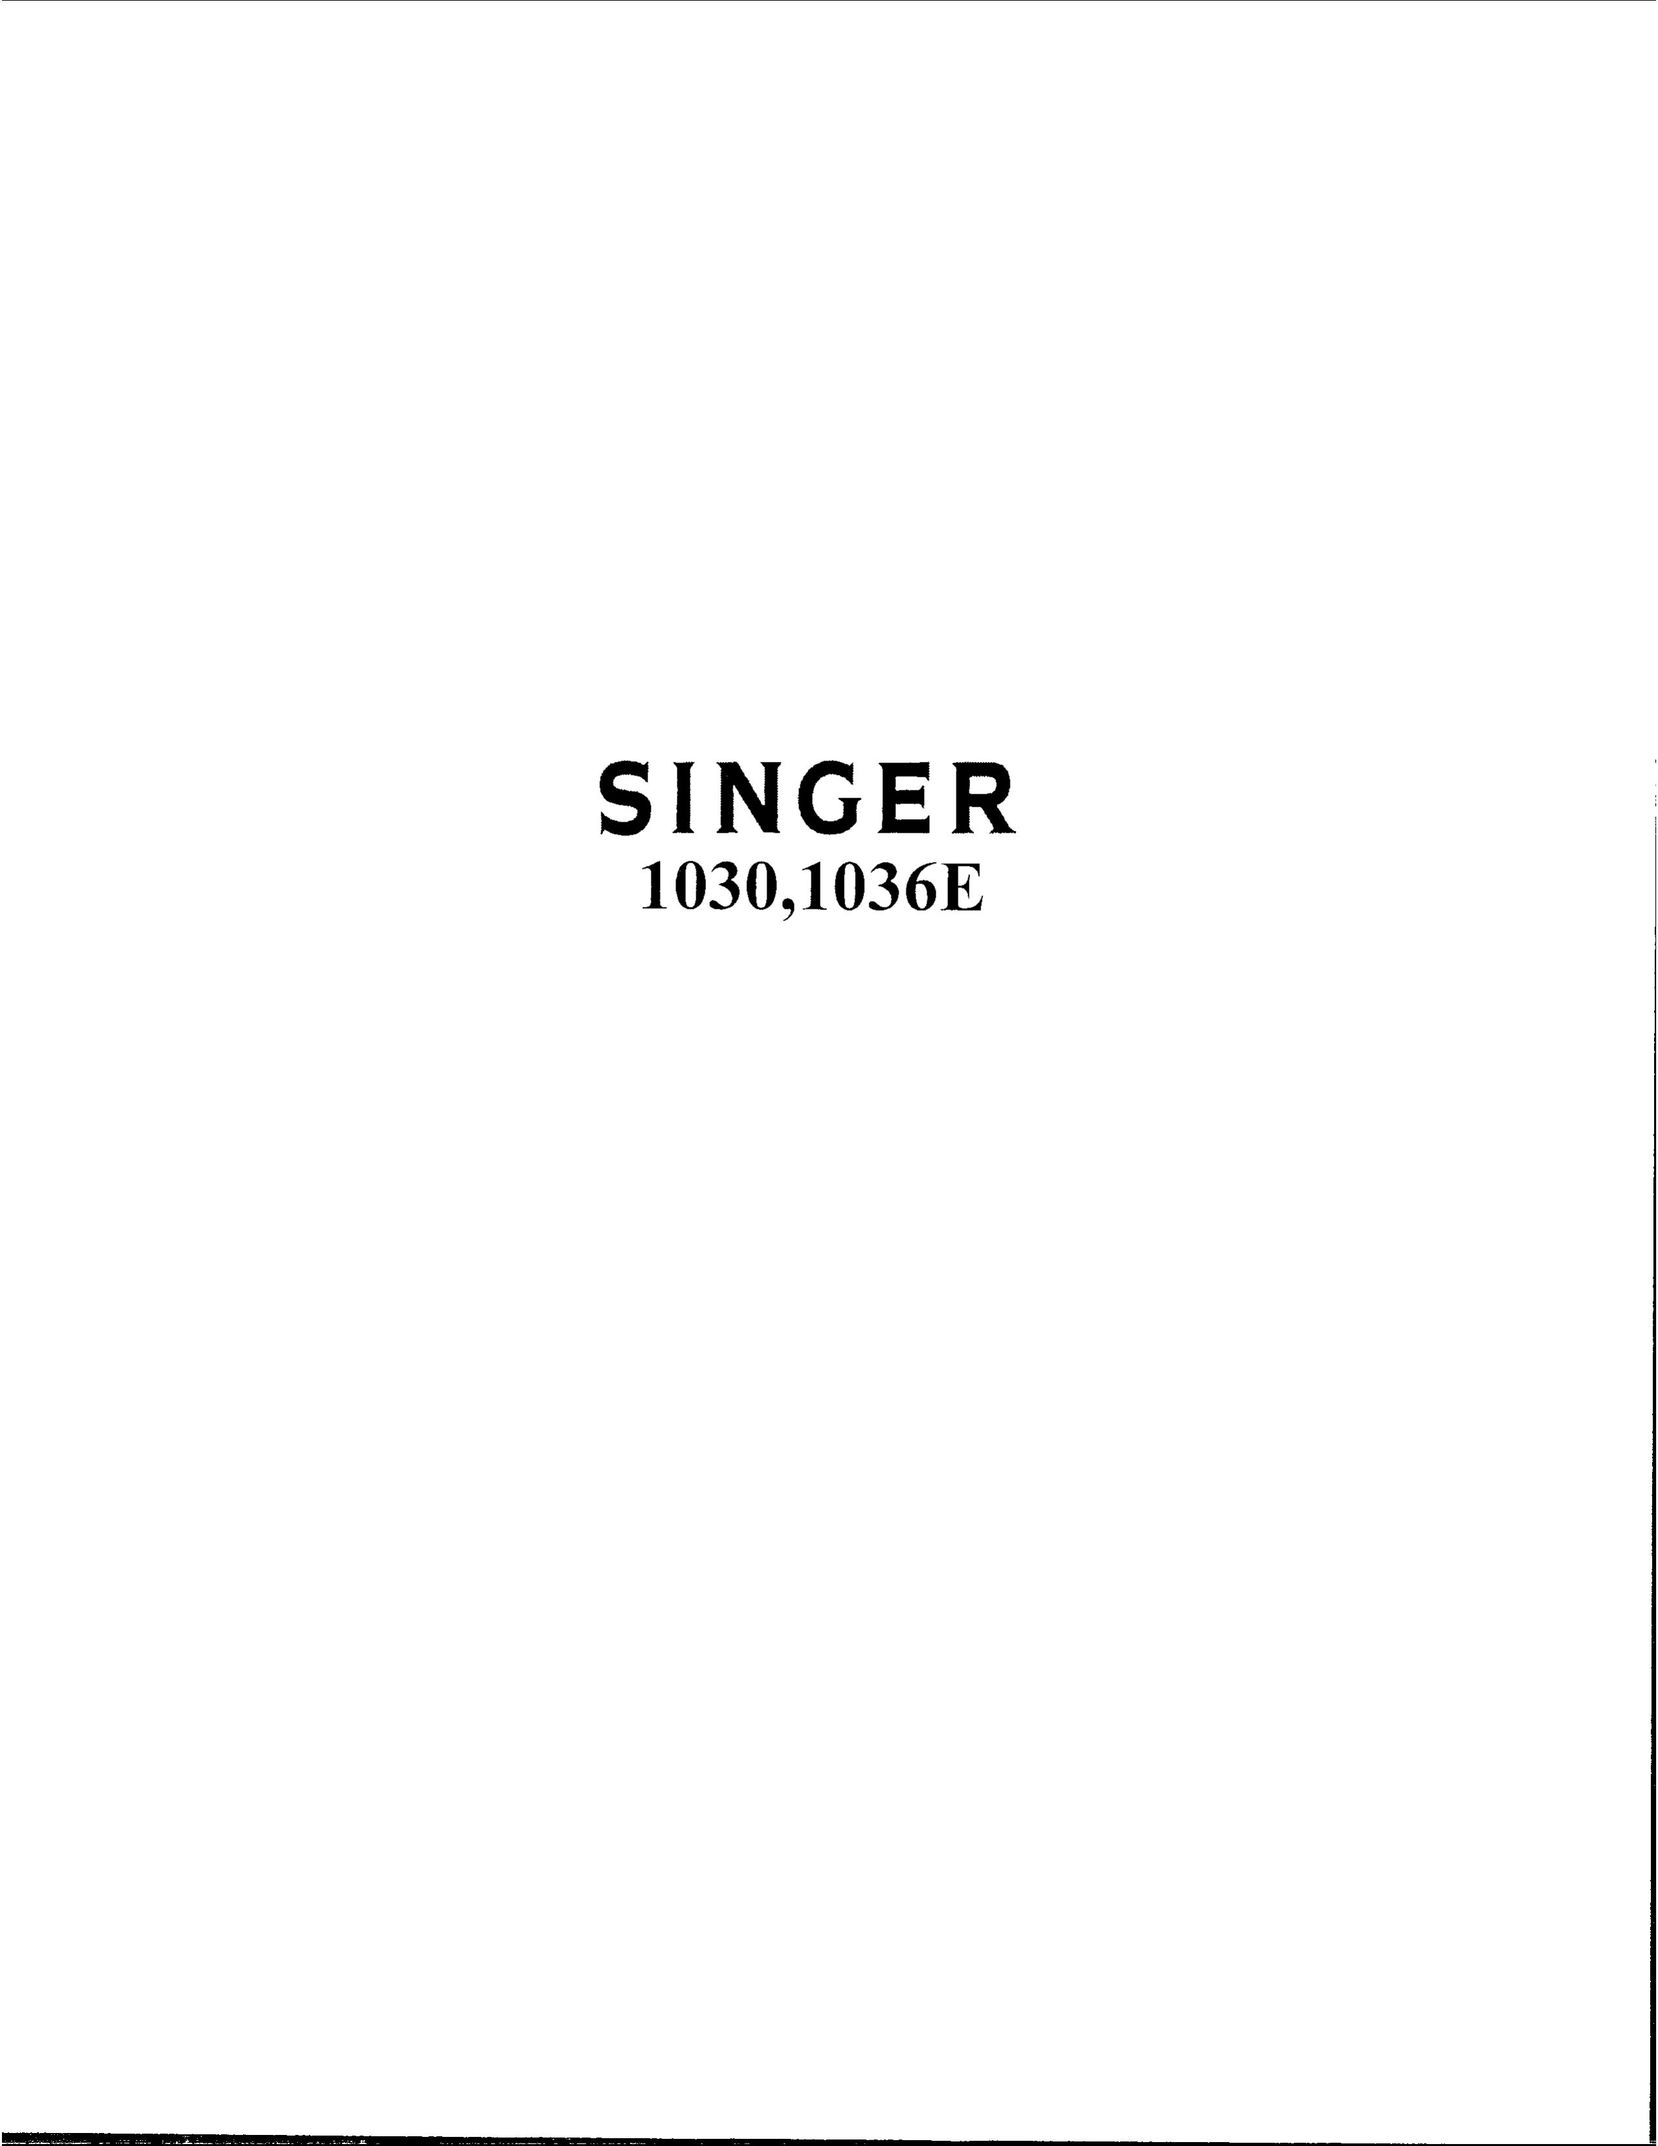 Singer 1036E Sewing Machine User Manual (Page 1)